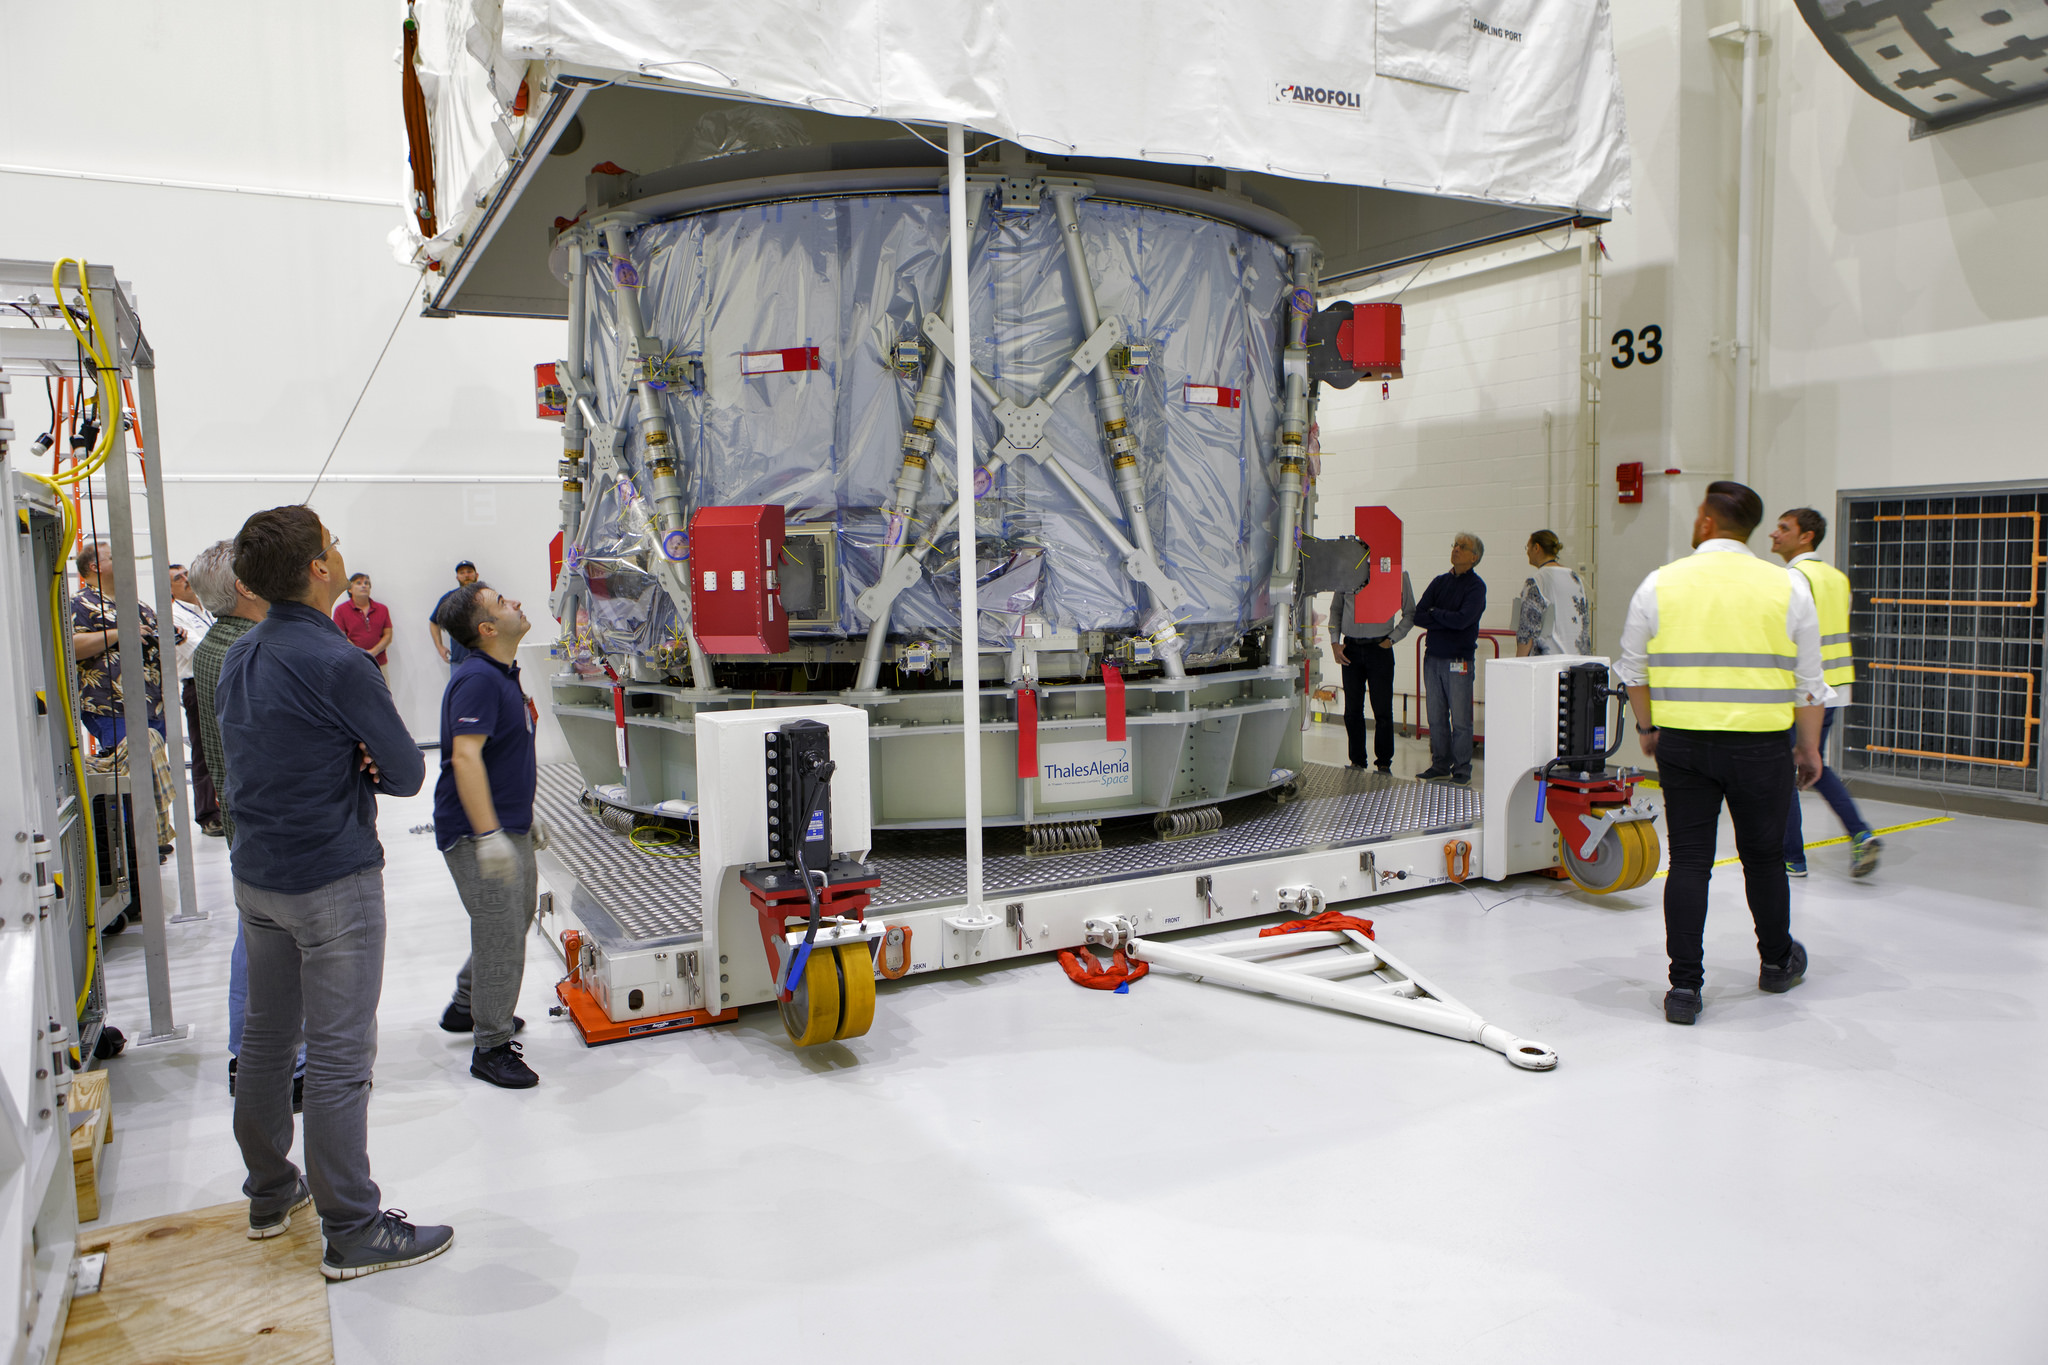 Engineers and technicians from ESA (European Space Agency) and ESA contractor Airbus uncrate Orion's European Service Module